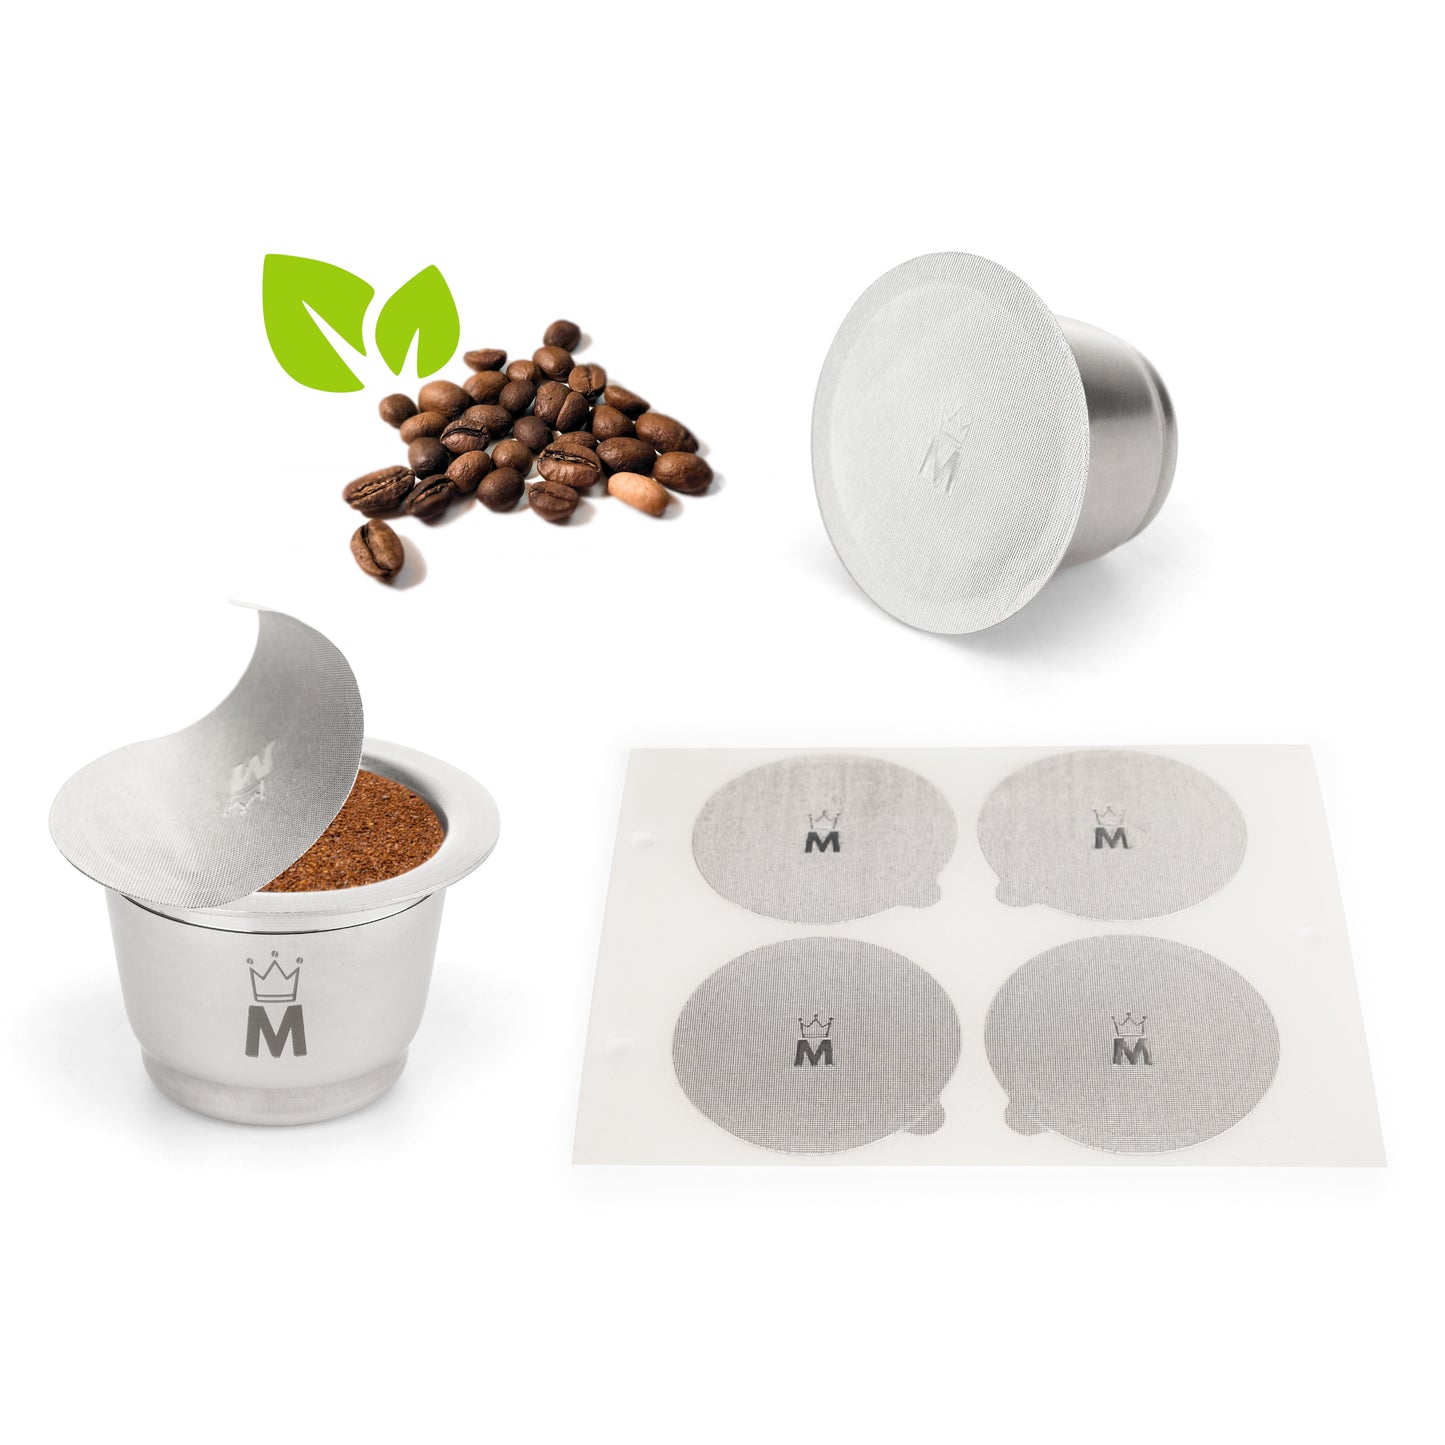 2 Refillable Coffee Pods Compatible with Nespresso - 100 Aluminum Lids